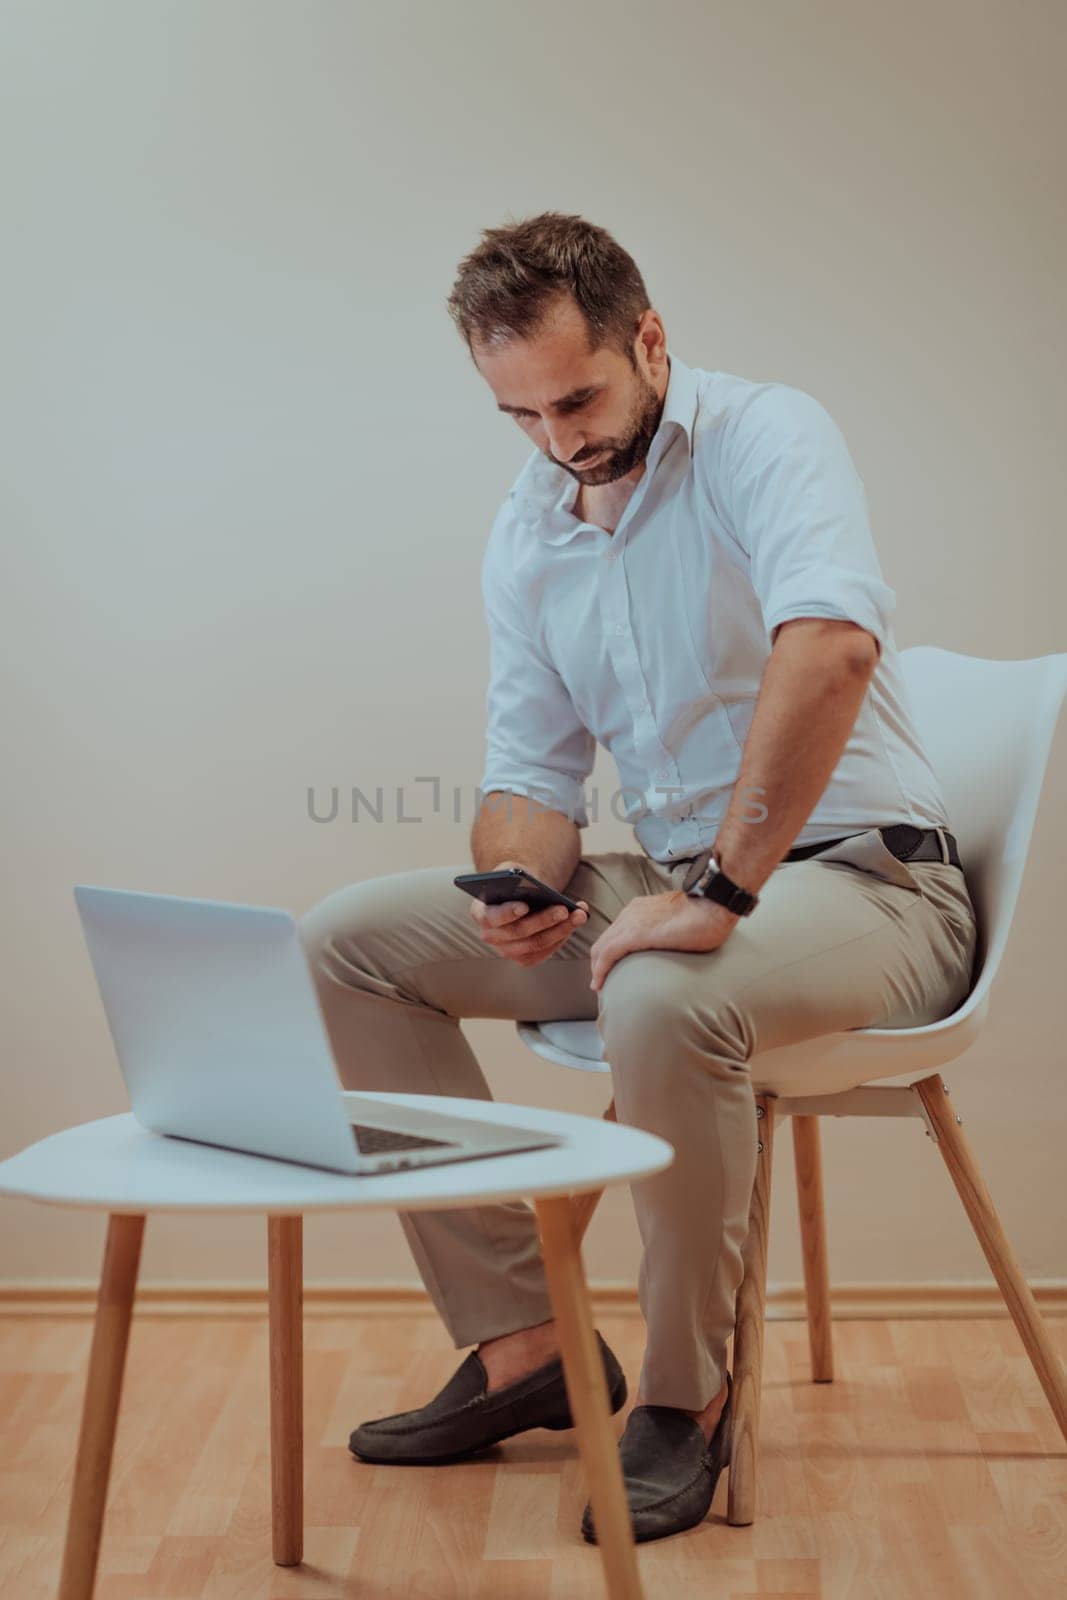 A confident businessman sitting and using laptop and smartphone with a determined expression, while a beige background enhances the professional atmosphere, showcasing his productivity and expertise